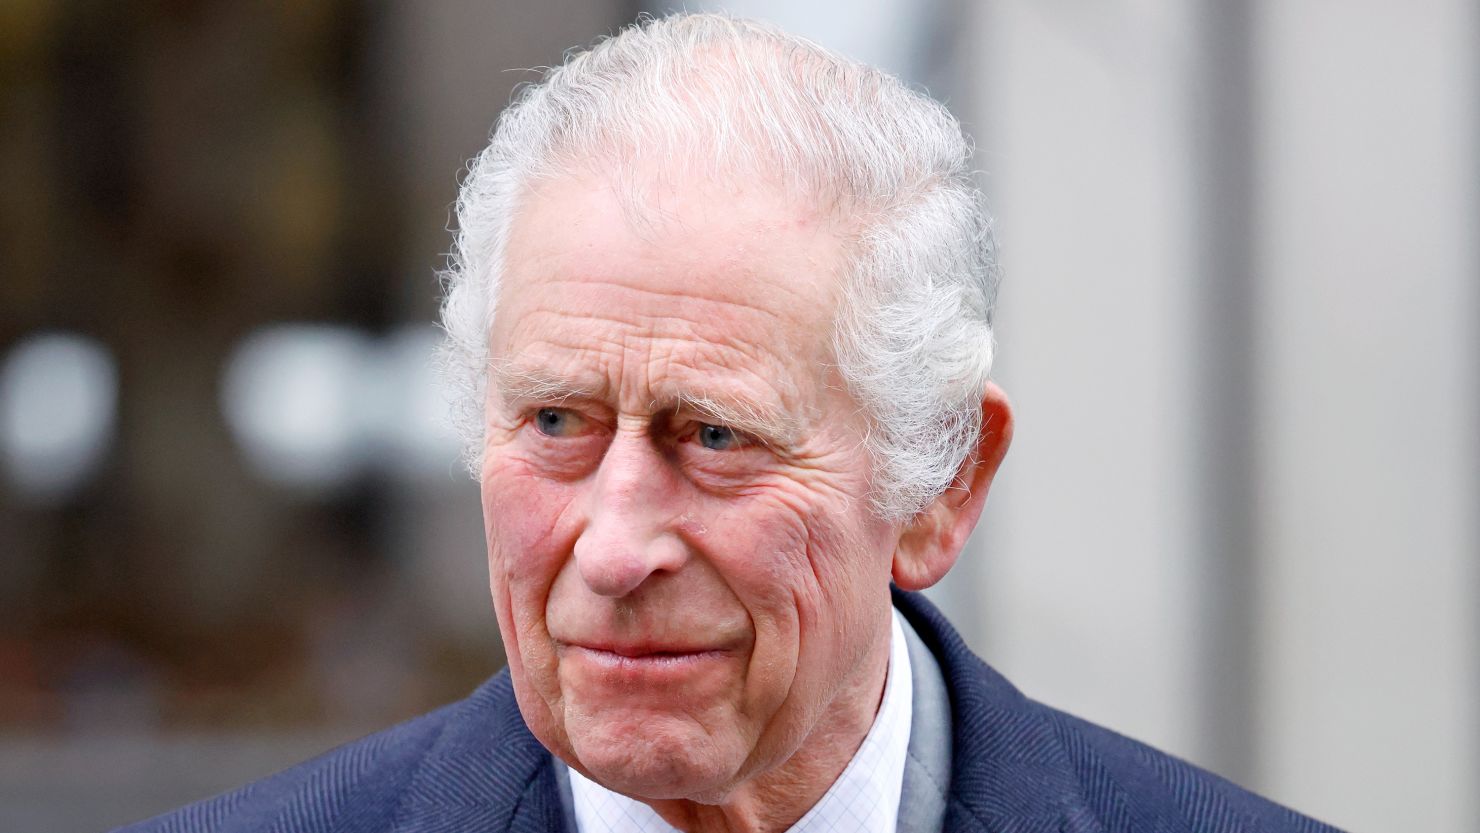 King Charles III leaves The London Clinic after undergoing a corrective procedure for an enlarged prostate on January 29 in London, England.